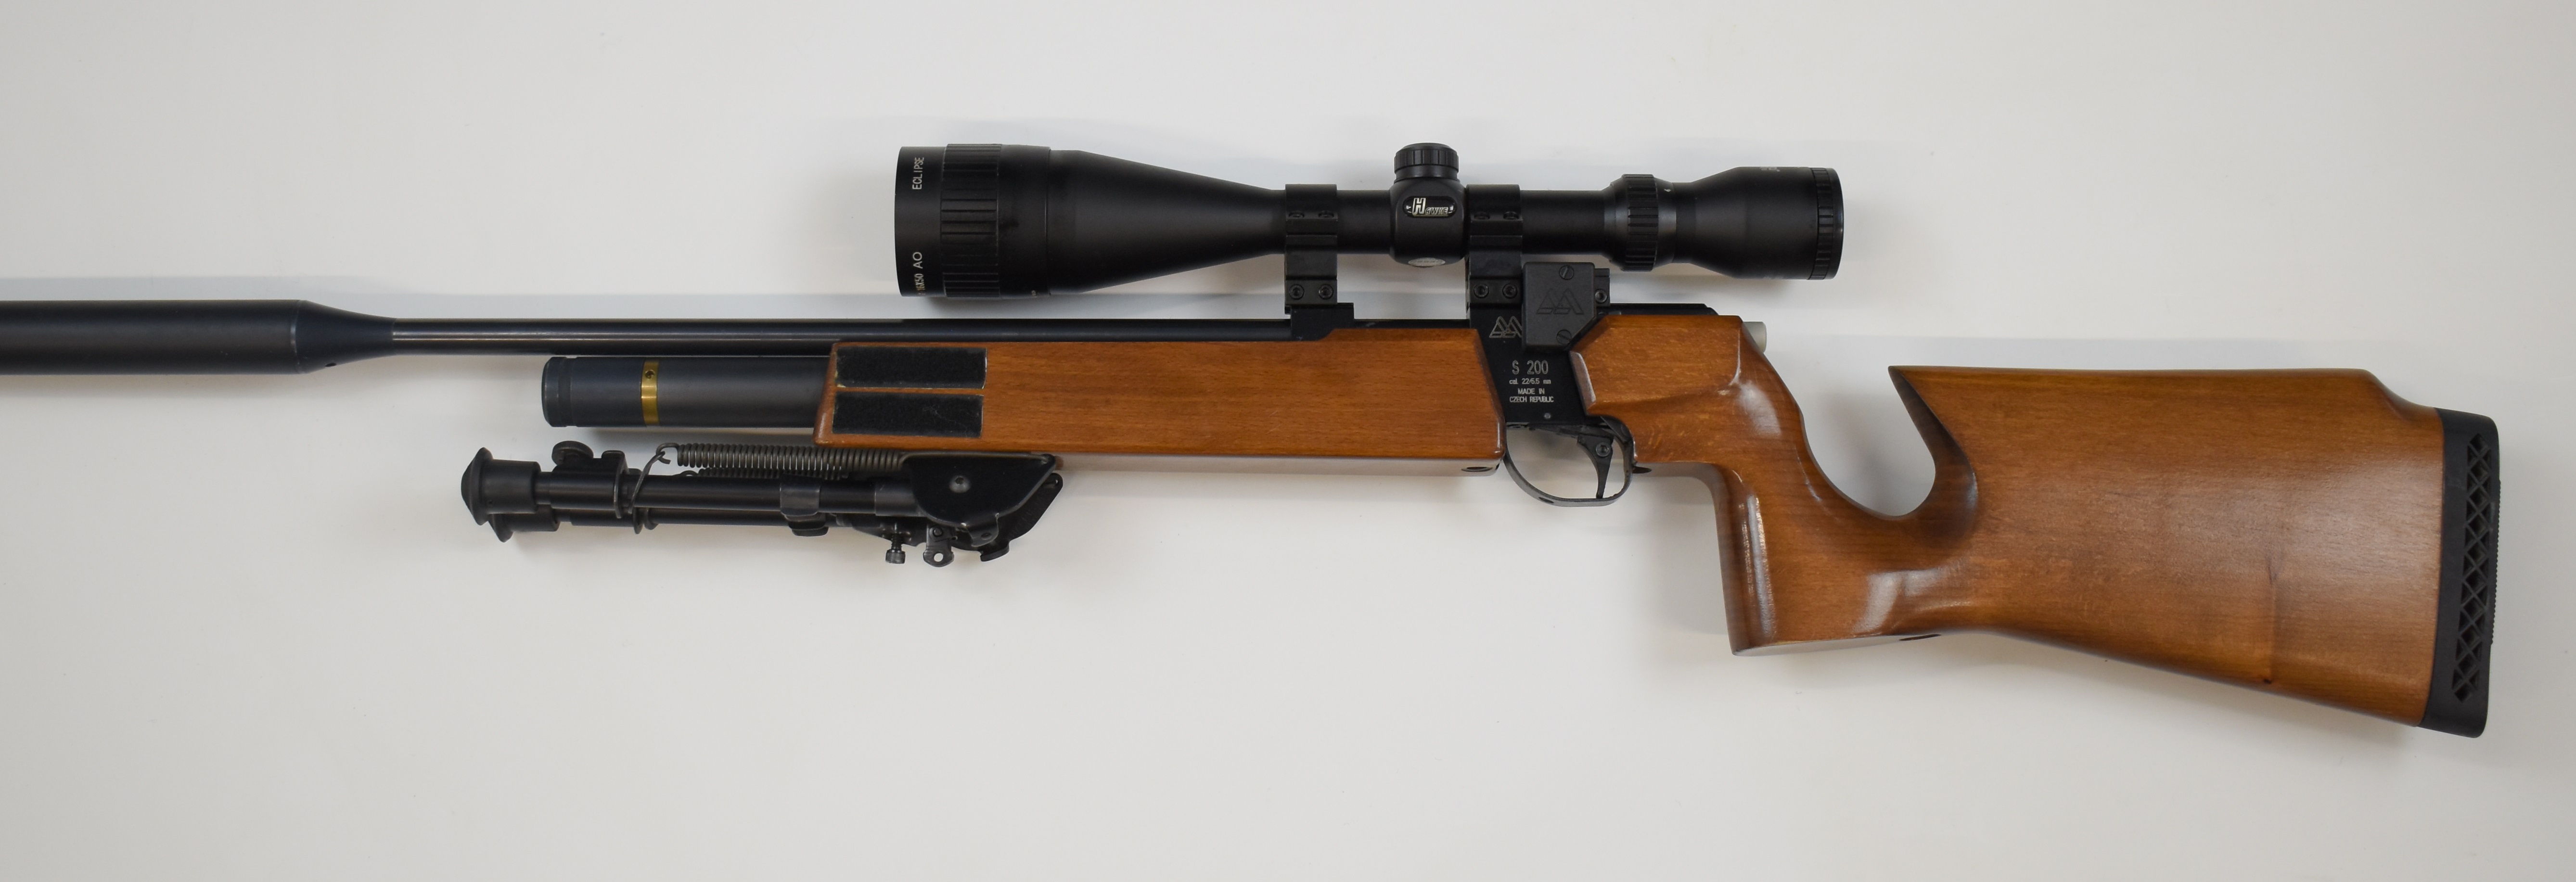 Air Arms S200 .22 PCP air rifle with 10-shot magazine, sound moderator, bi-pod, adjustable trigger - Image 6 of 9